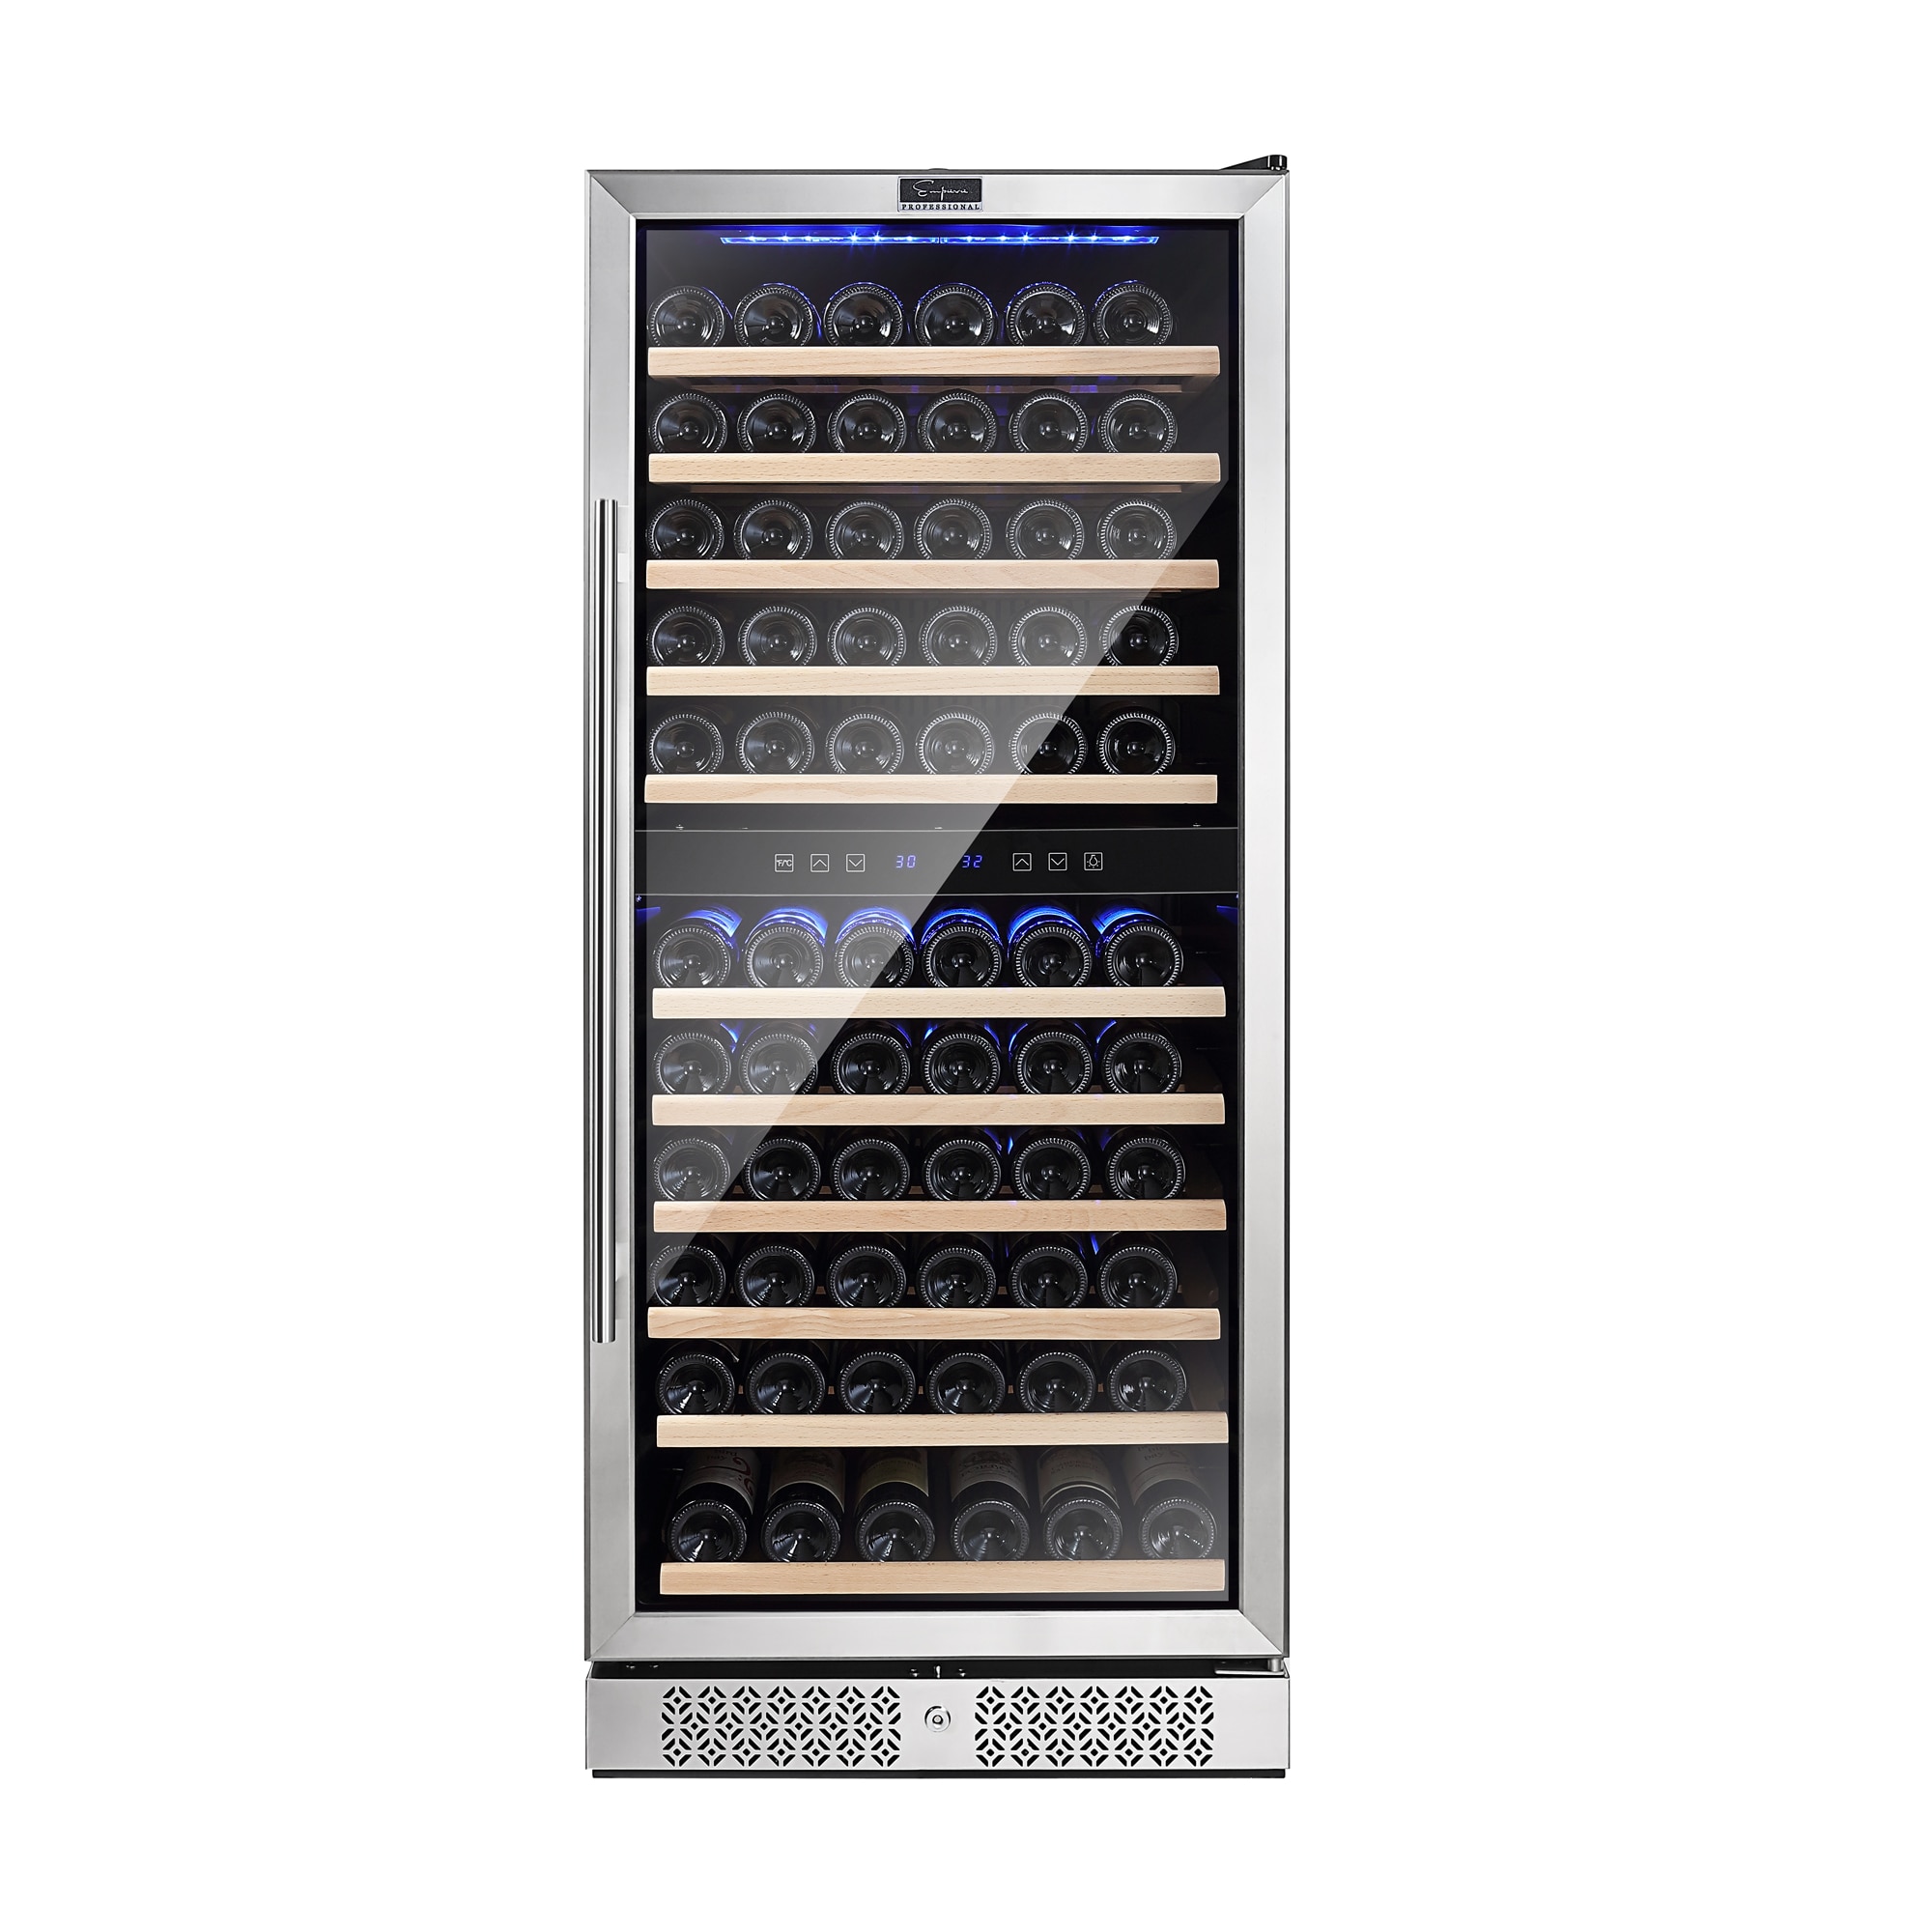 23.4-in W 116-Bottle Capacity Stainless Steel Dual Zone Cooling Built-In /freestanding Wine Cooler | - Empava EPV-WC06D